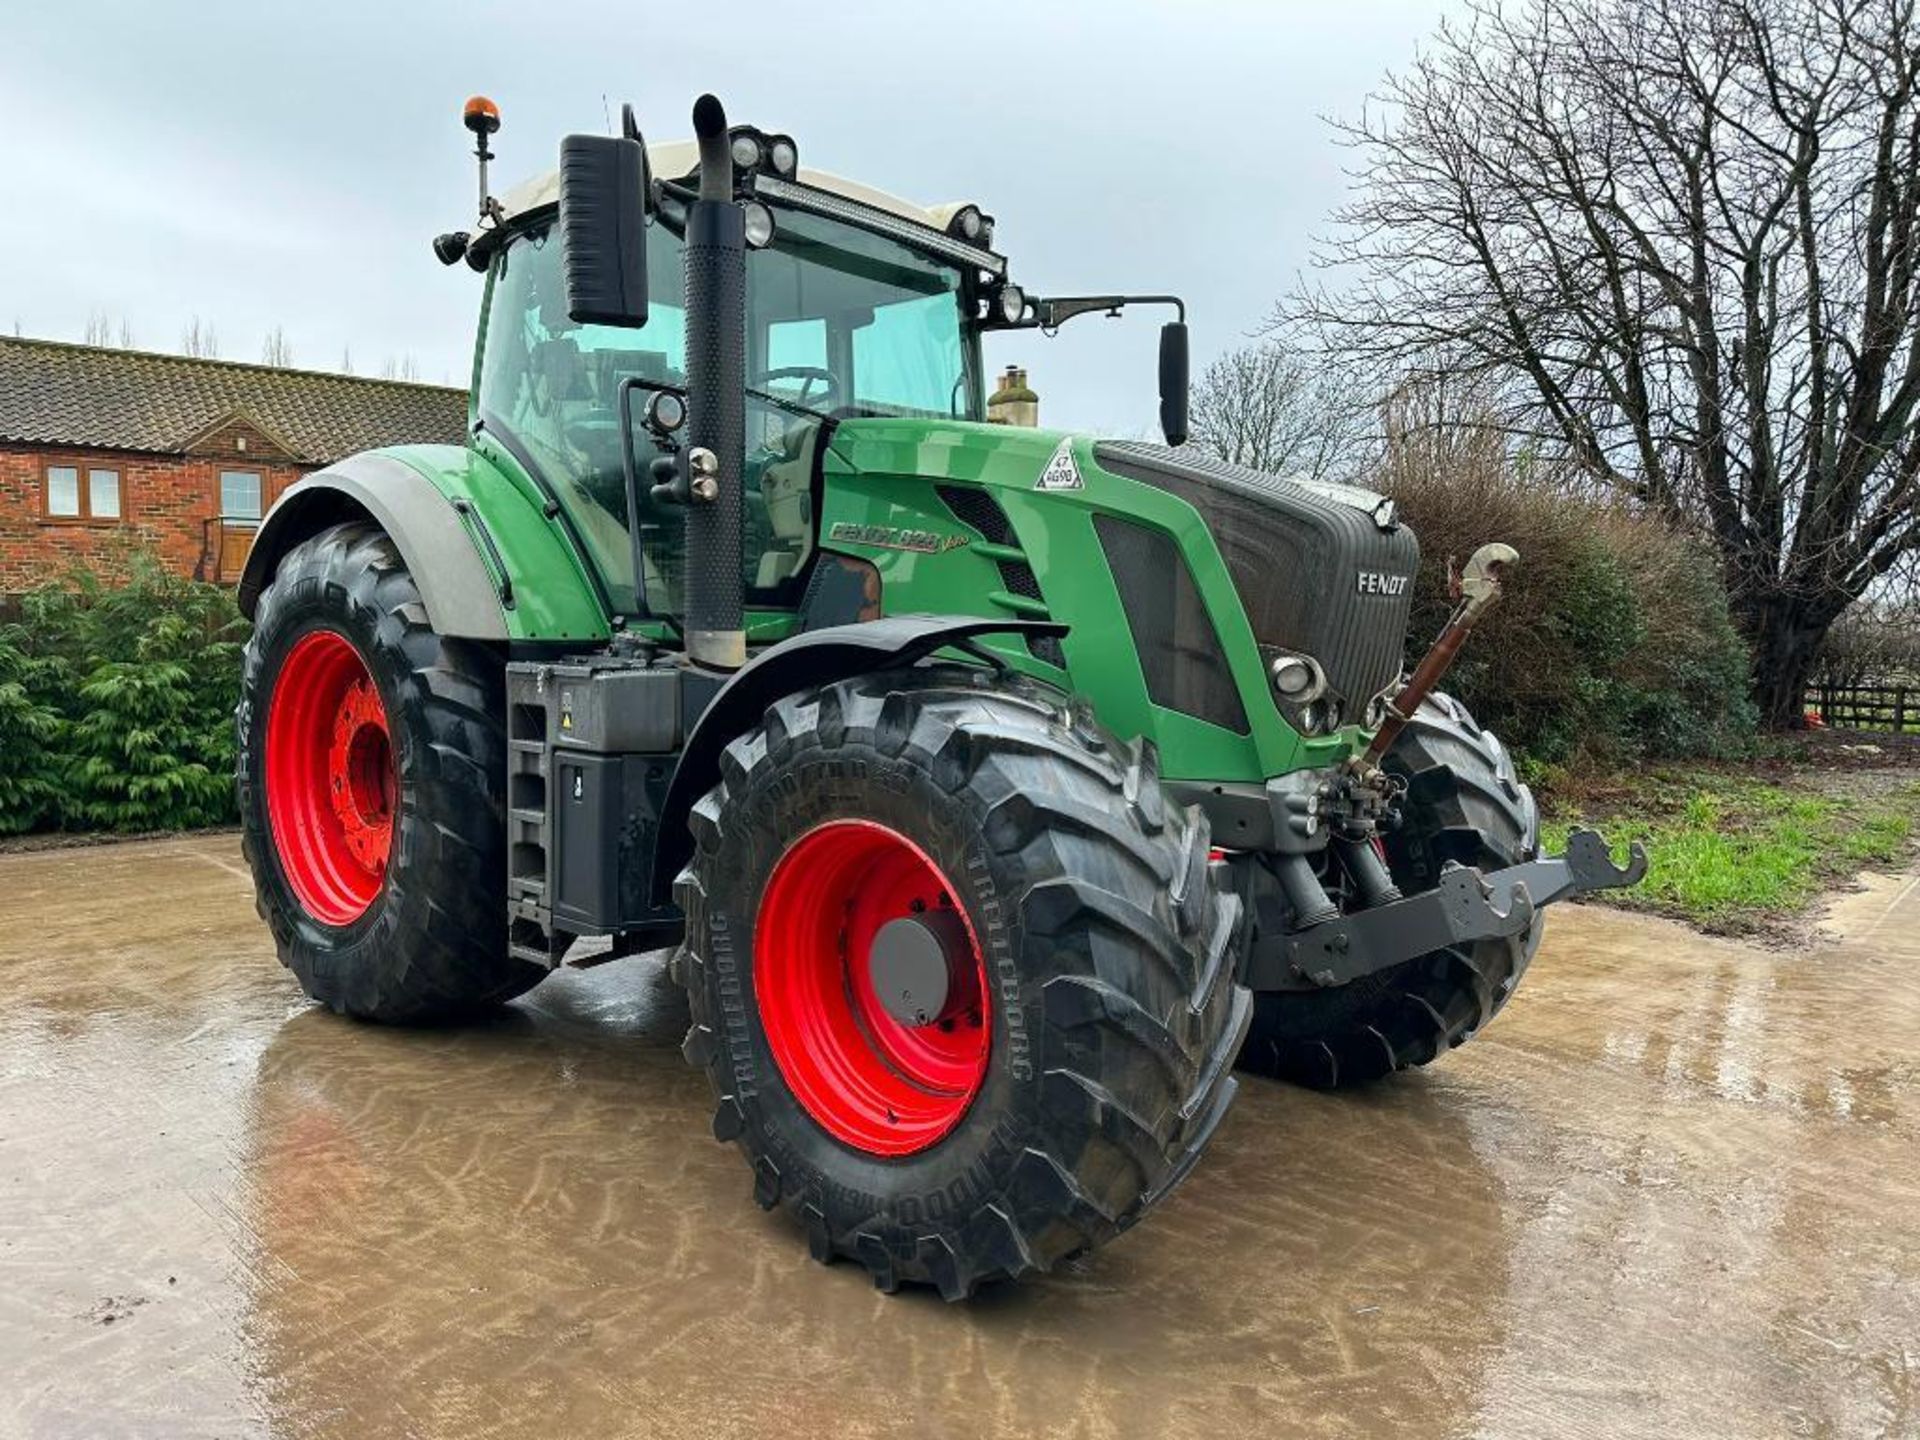 2013 Fendt 828 Vario tractor, 4wd, front linkage, front spool valves, 4No rear spool valves, Bill Be - Image 12 of 23